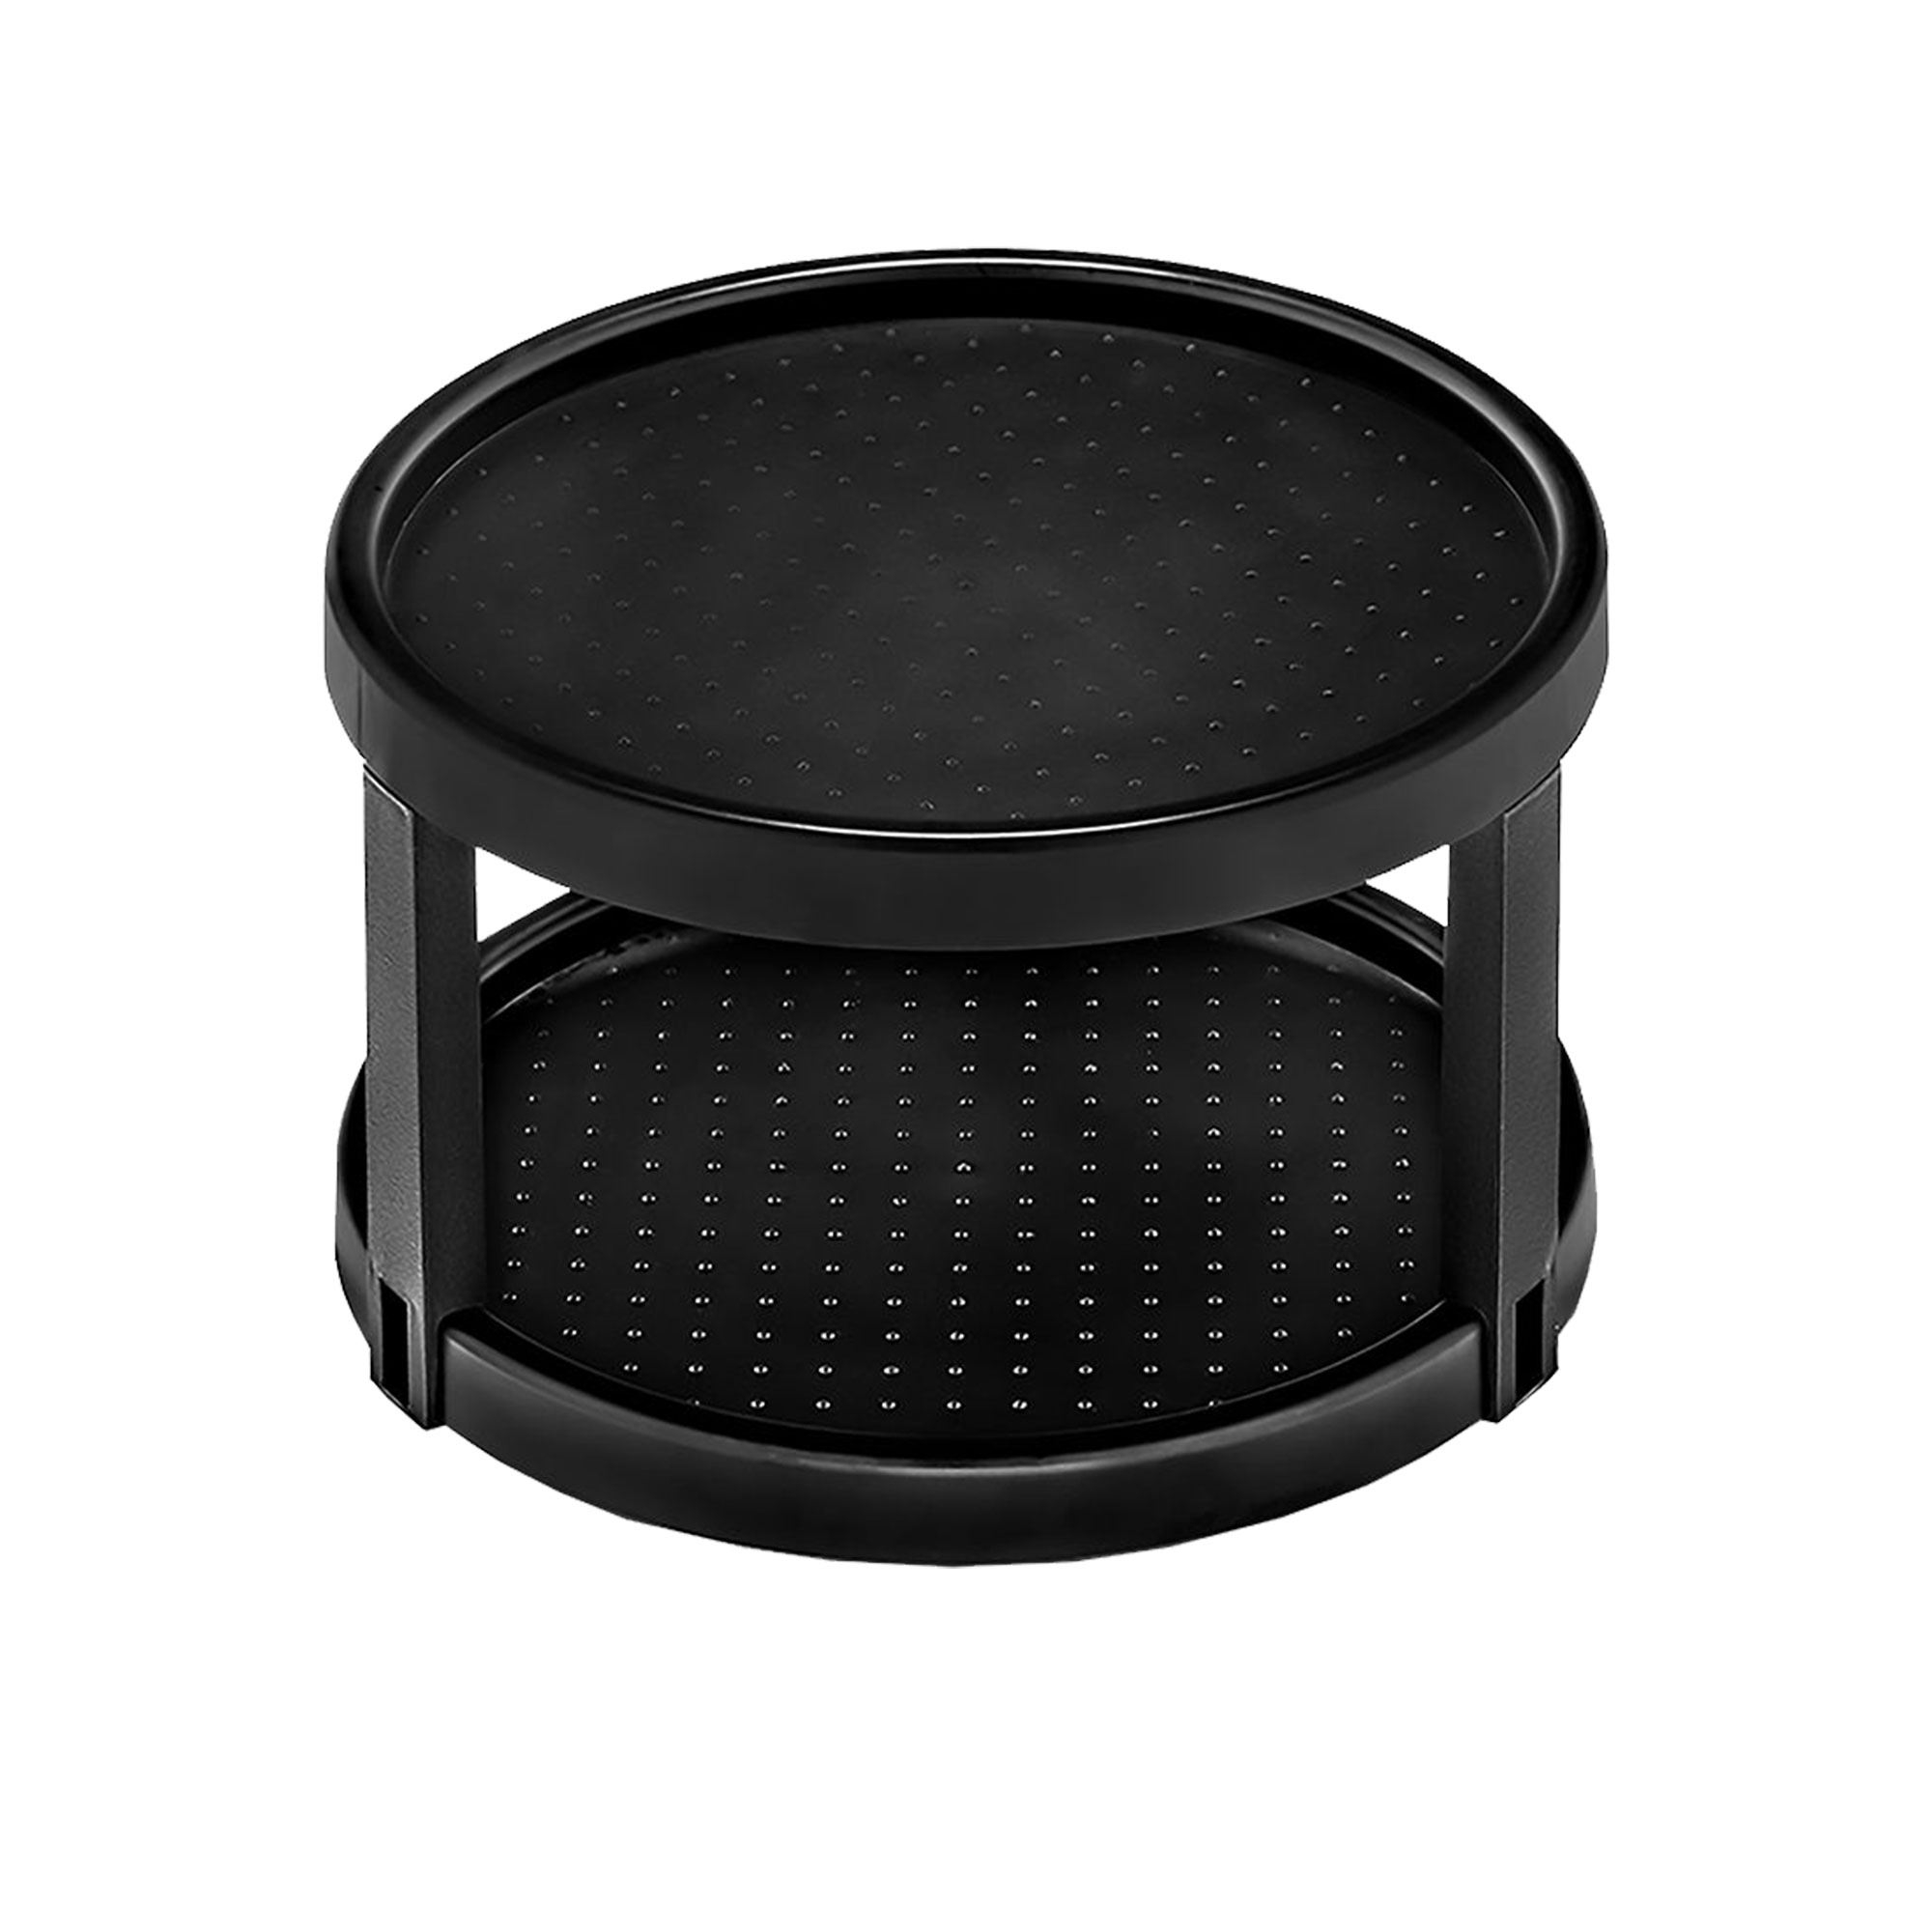 Madesmart 2 Tier Turntable 25.4cm Carbon Image 1